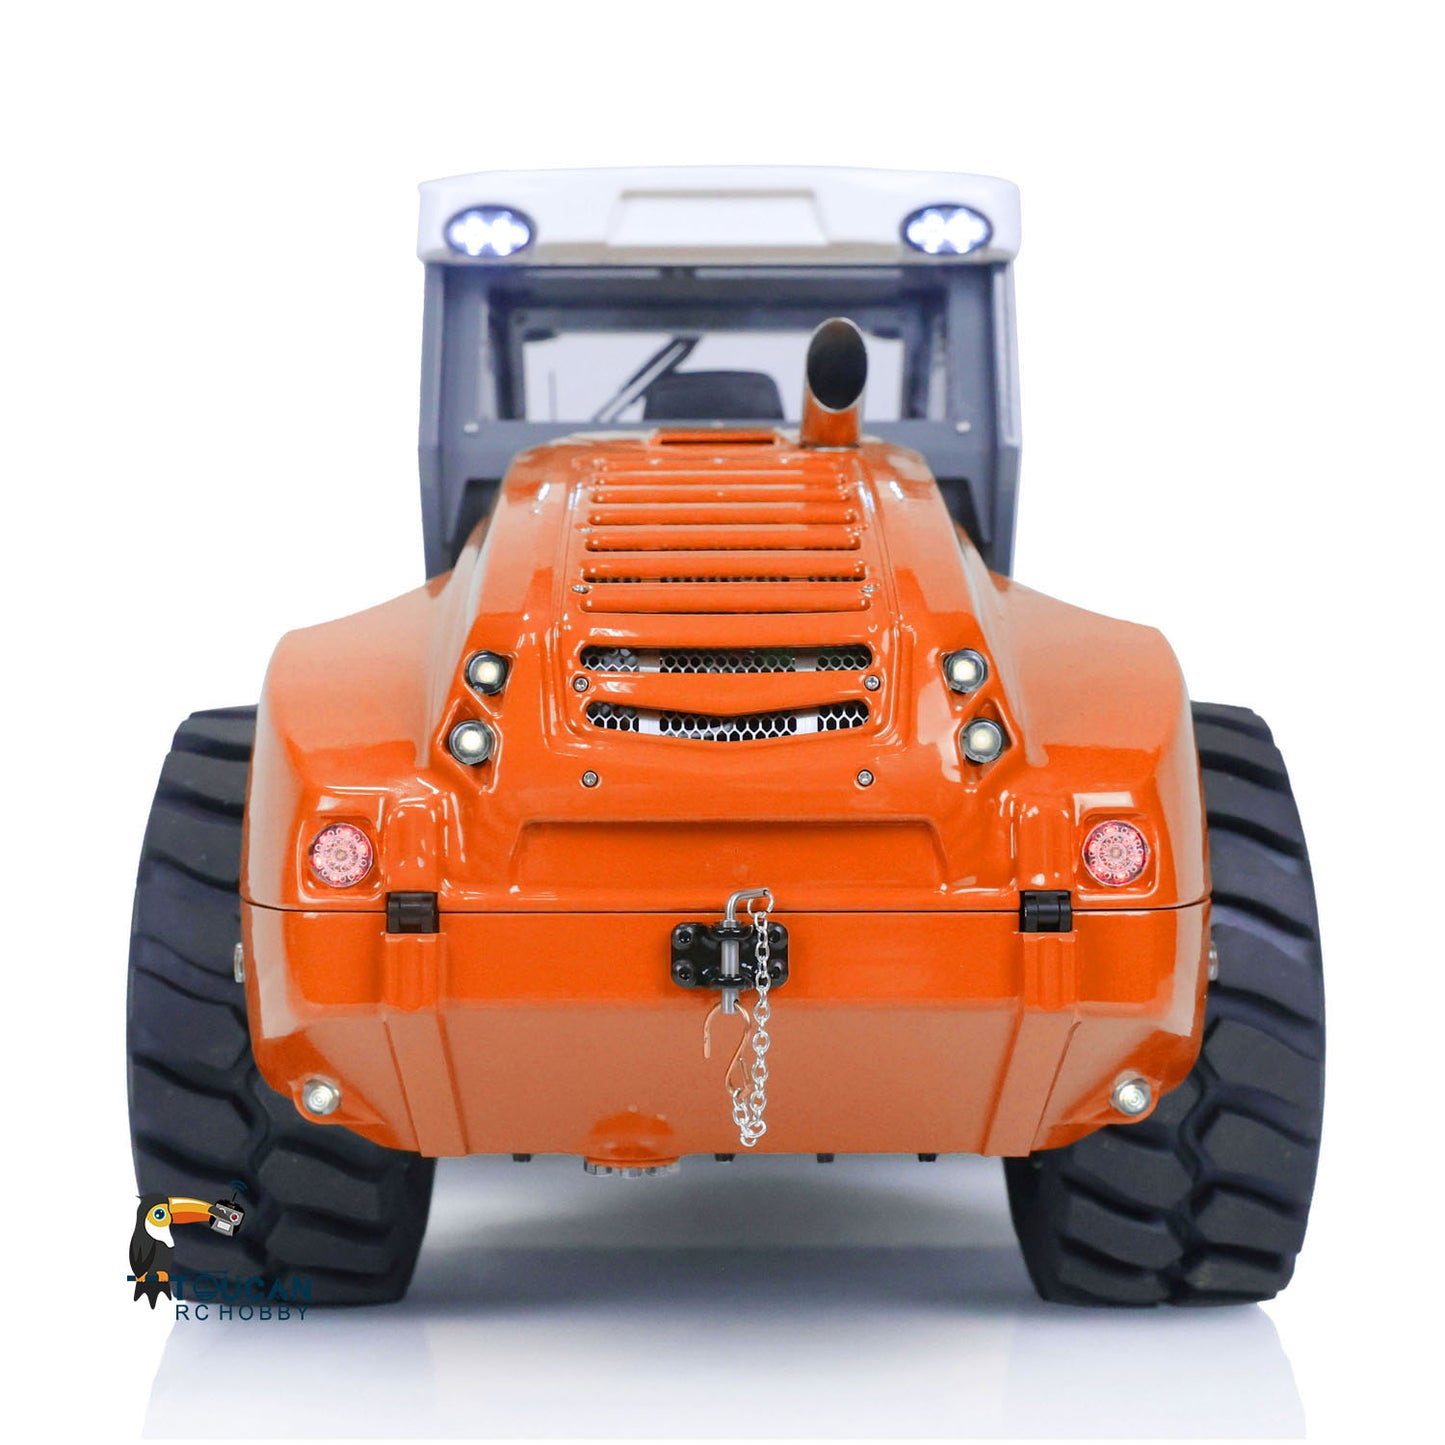 1/14 LESU Aoue-H13i RC Hydraulic Road Roller Orange Electric Assembled Engineering Metal Vehicle Sound Light System PL18EVLite